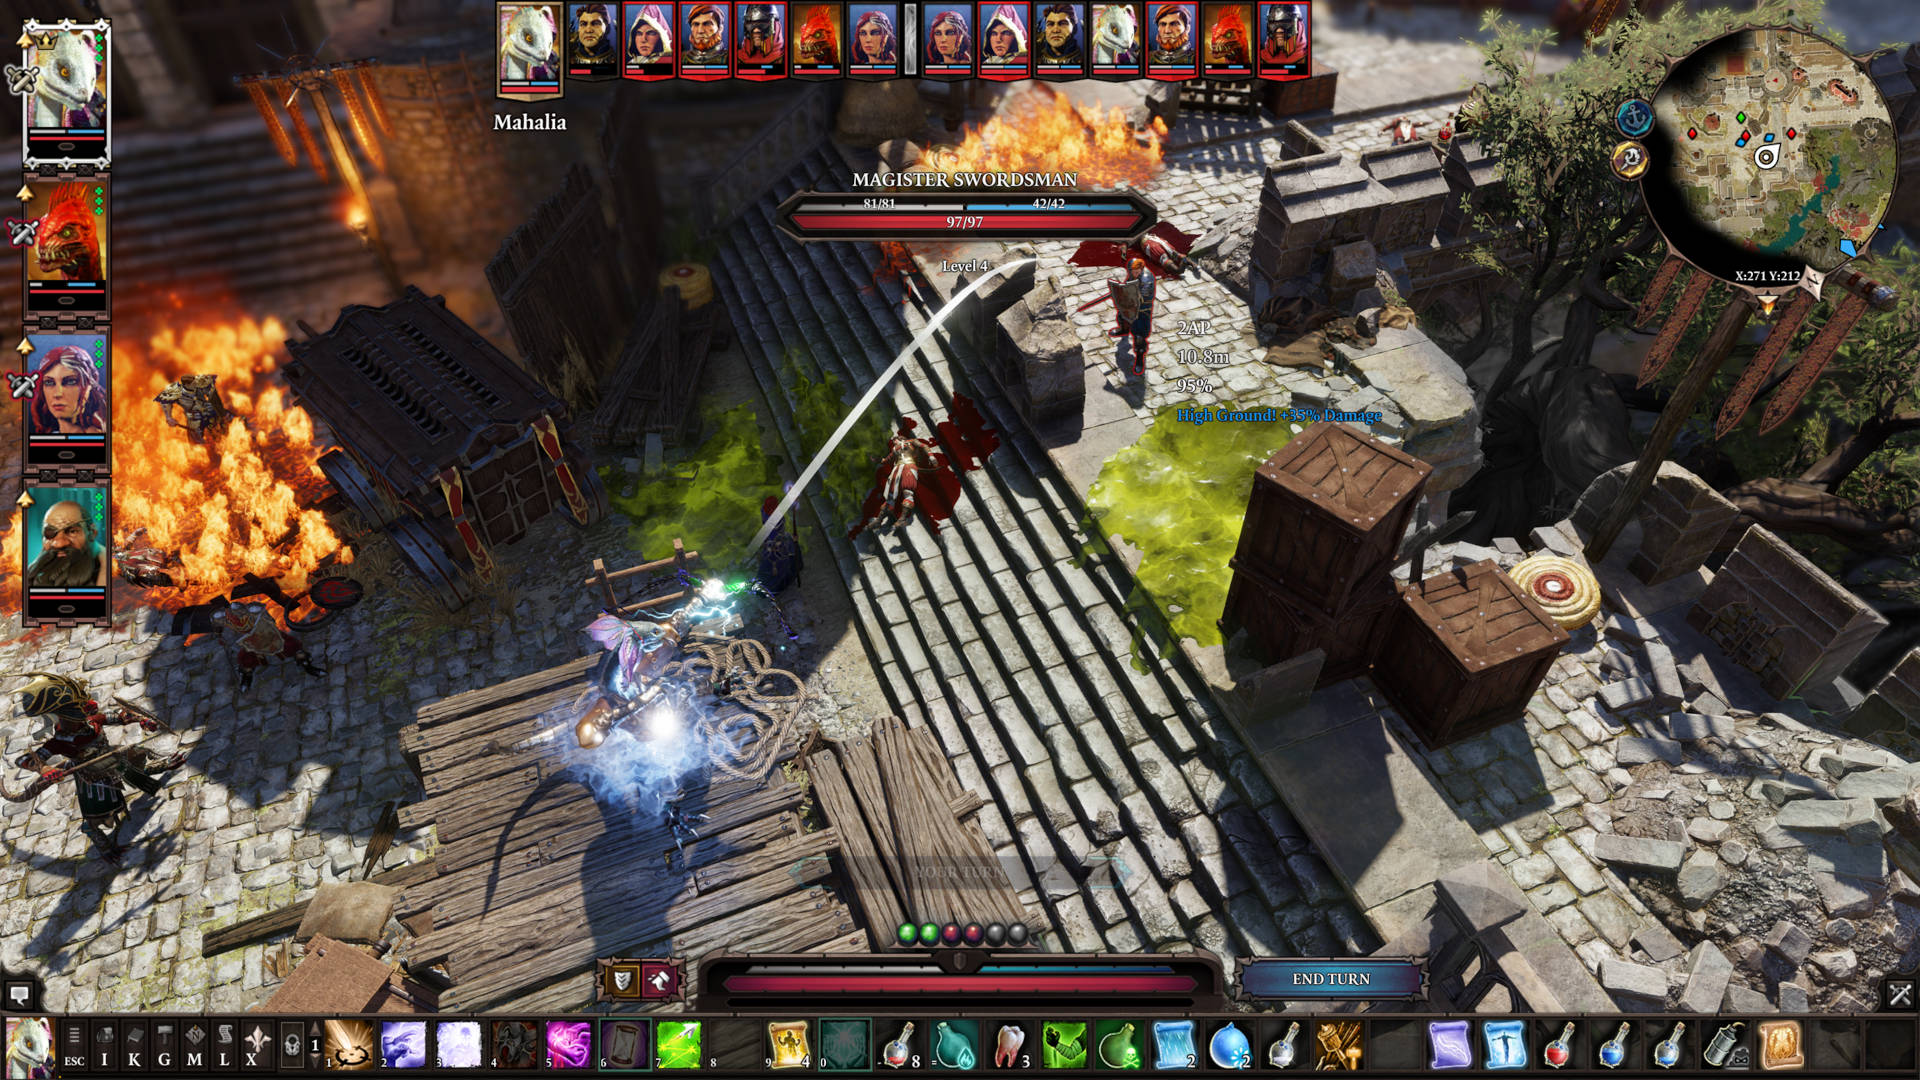 Best fantasy games: Divinity: Original Sin 2. Image shows a battle unfolding on a staircase in a cobbled street.